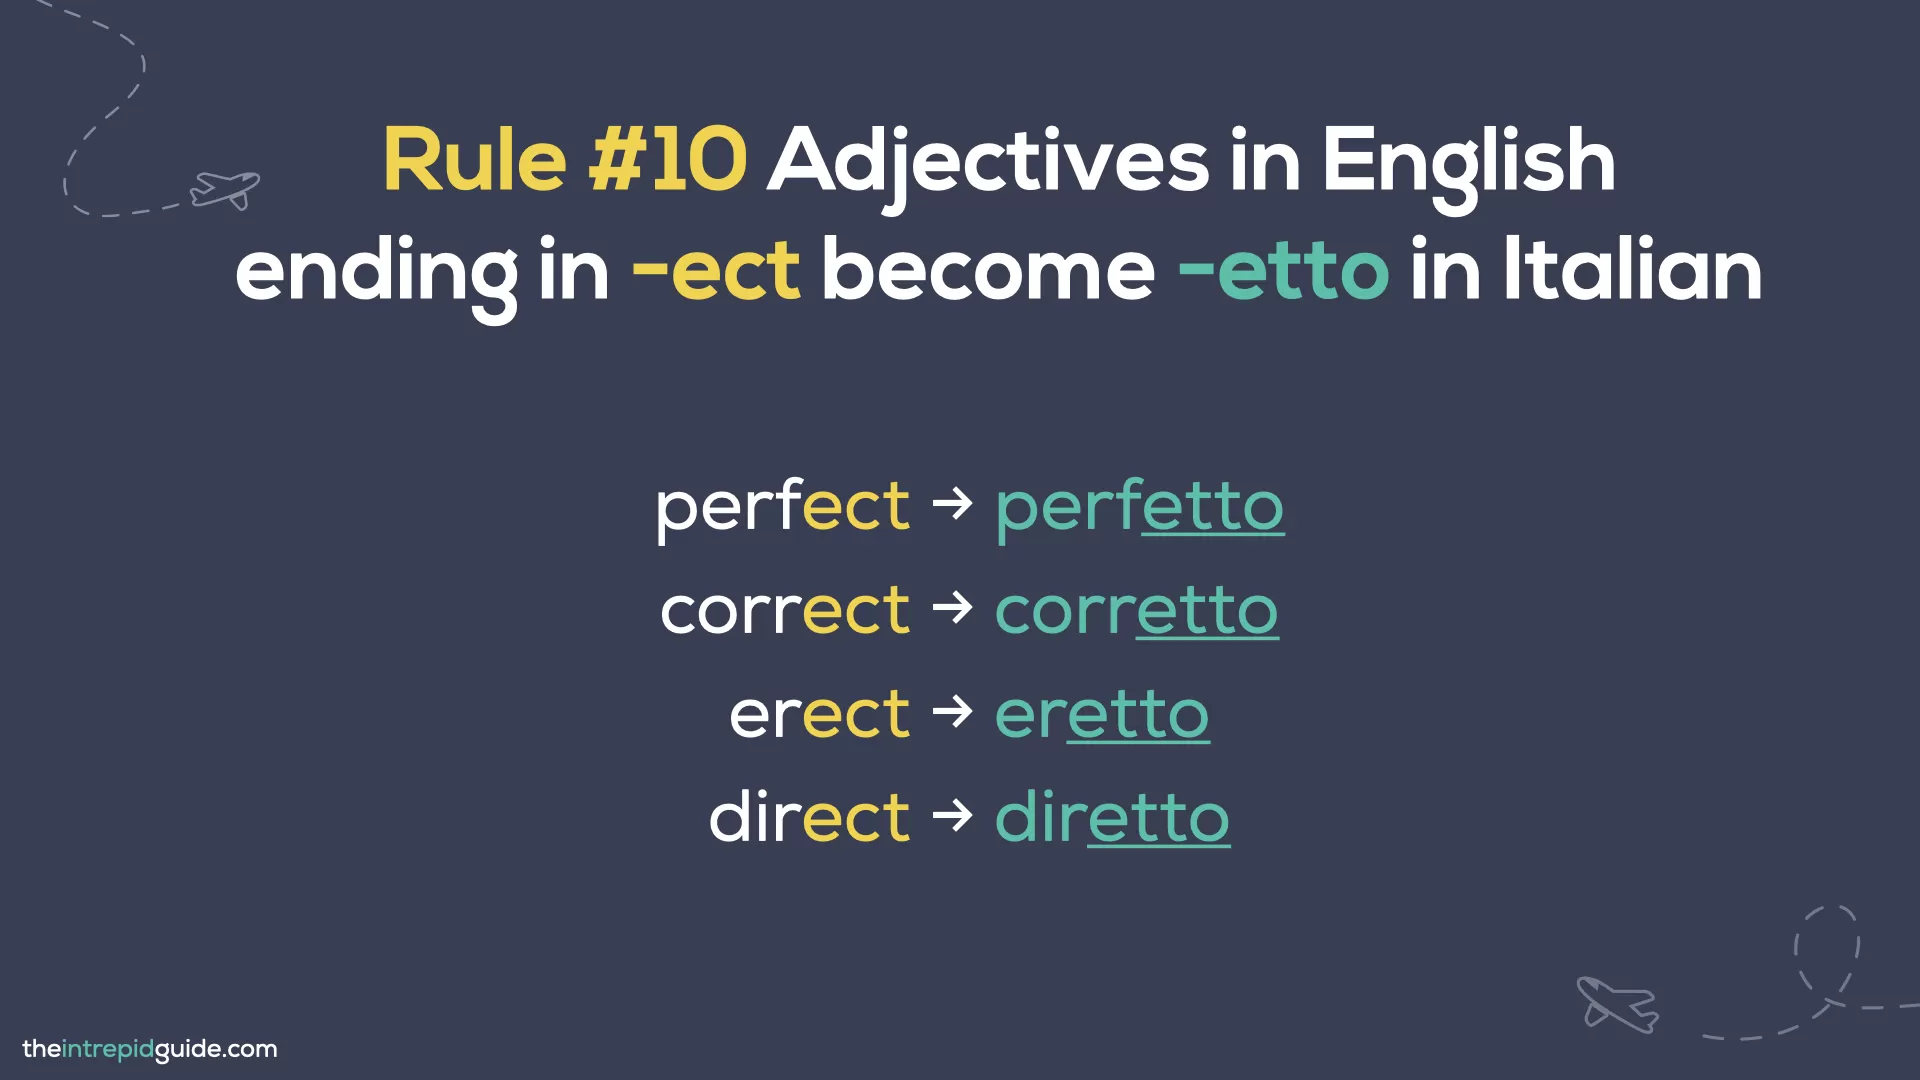 Italian cognates and loan words - Rule 10 - Adjectives in English ending in -ect become -etto in Italian